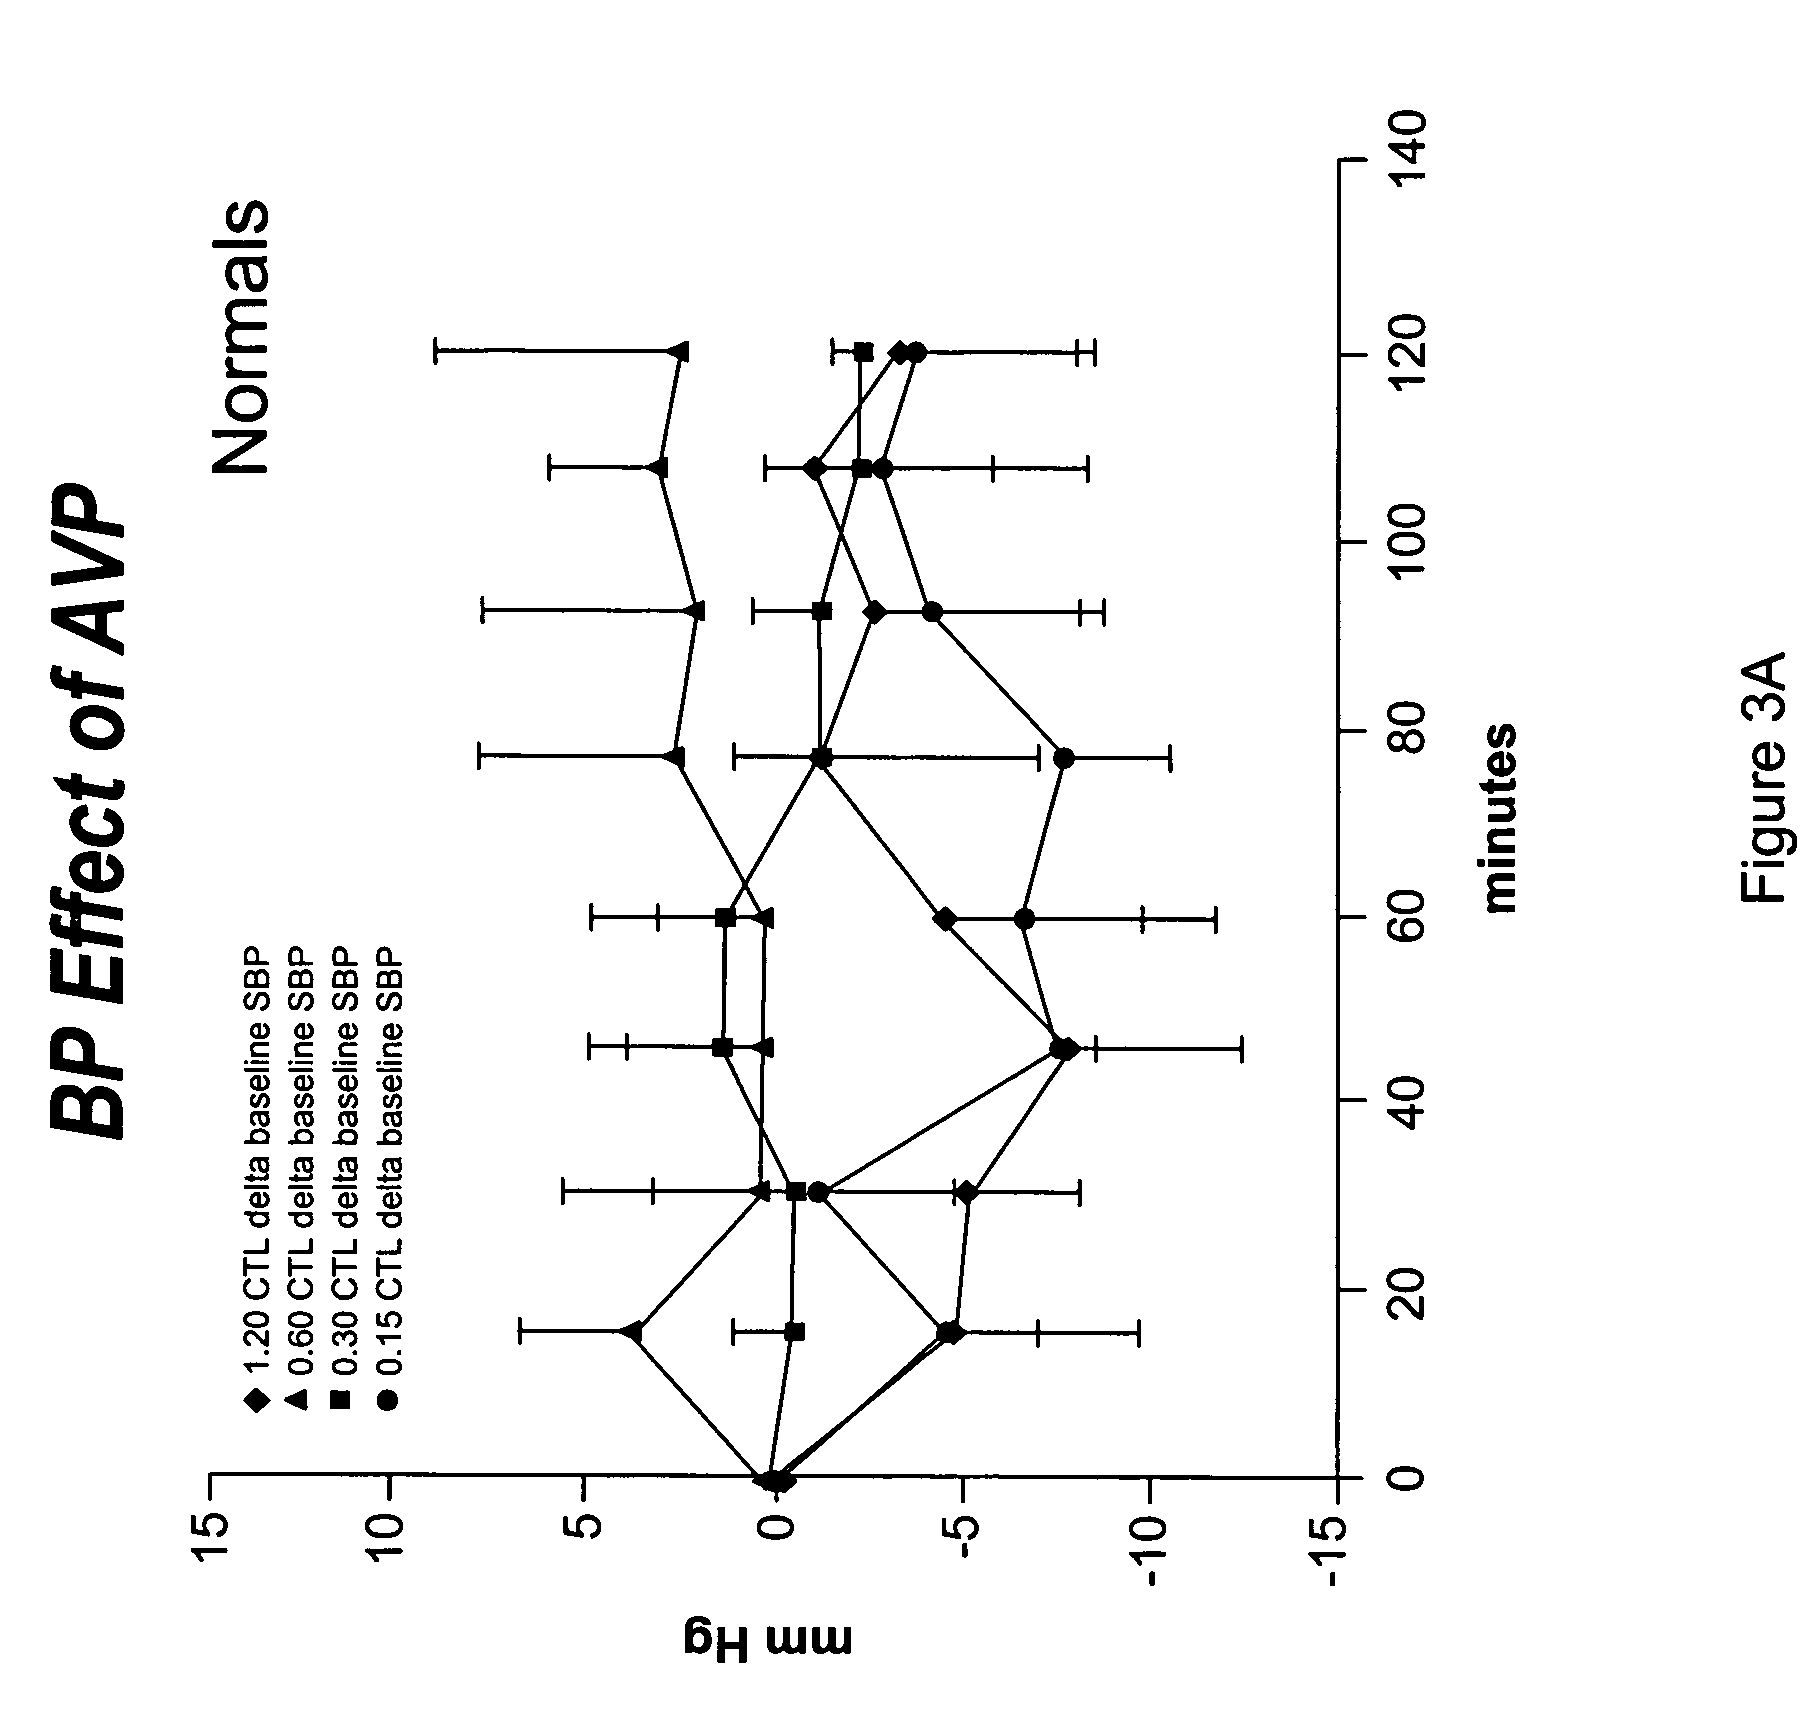 Method for stabilizing blood pressure in hemodialysis subjects